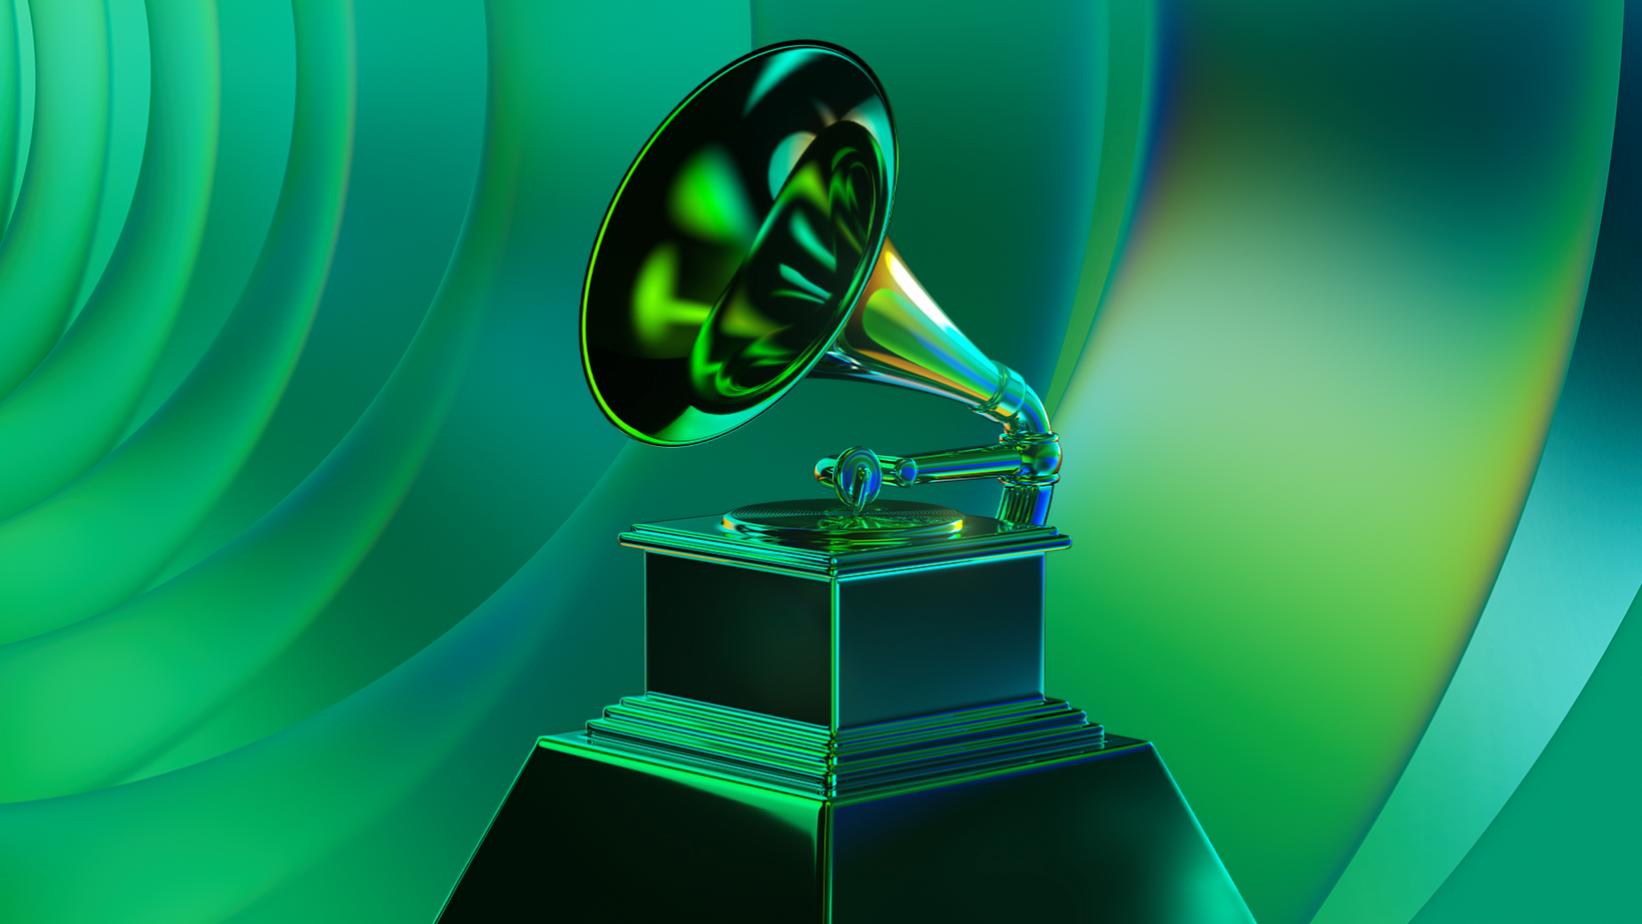 2022 GRAMMYs: List of Christian Nominees for Grammy Awards